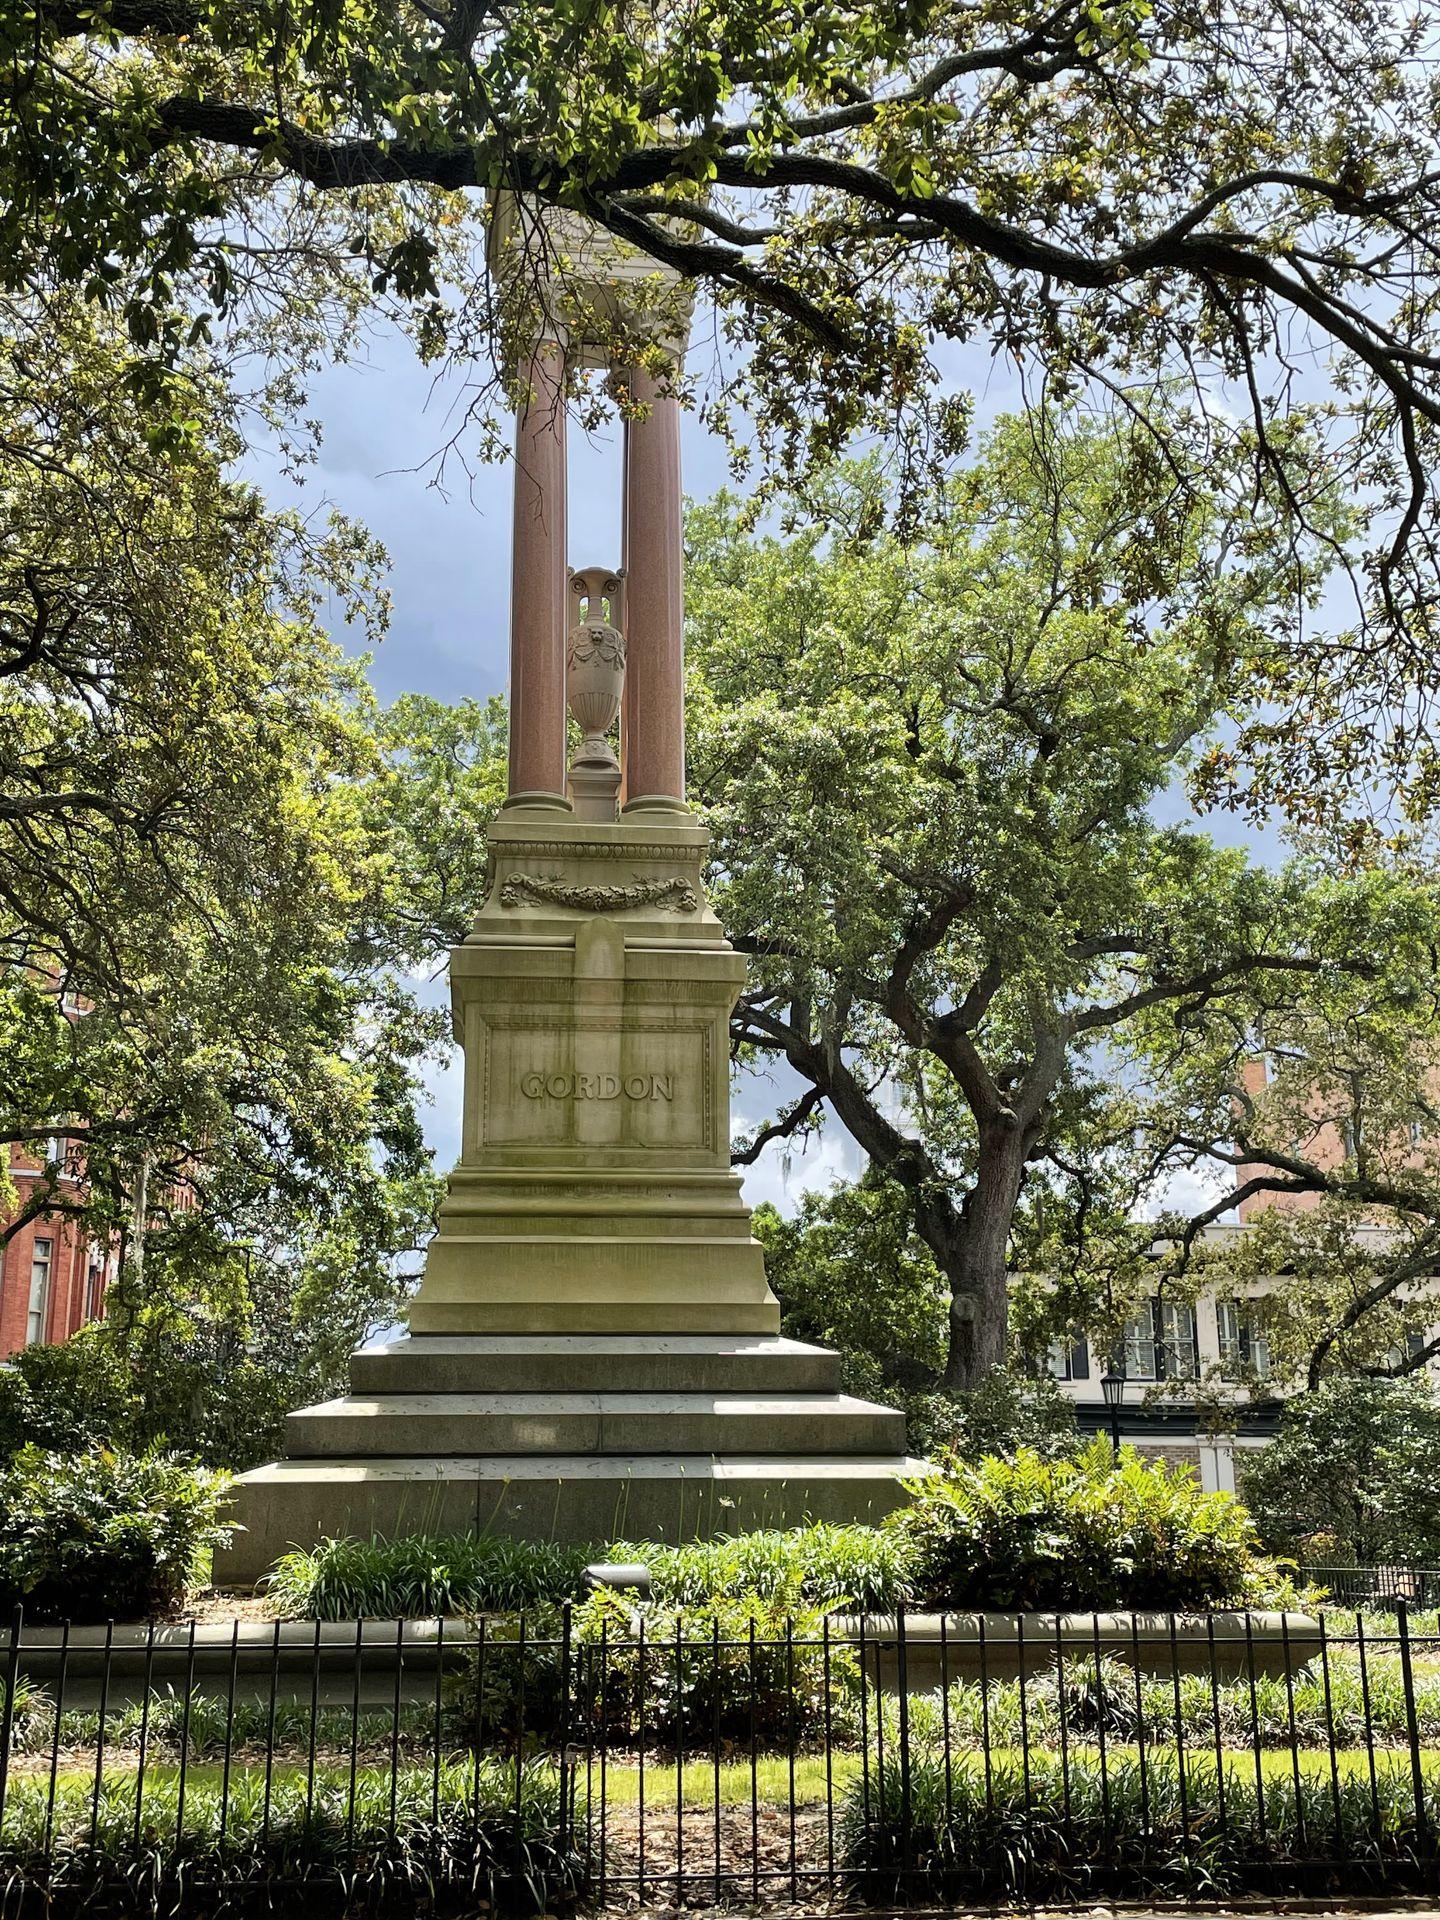 A statue in the Chippewa Square in downtown Savannah.